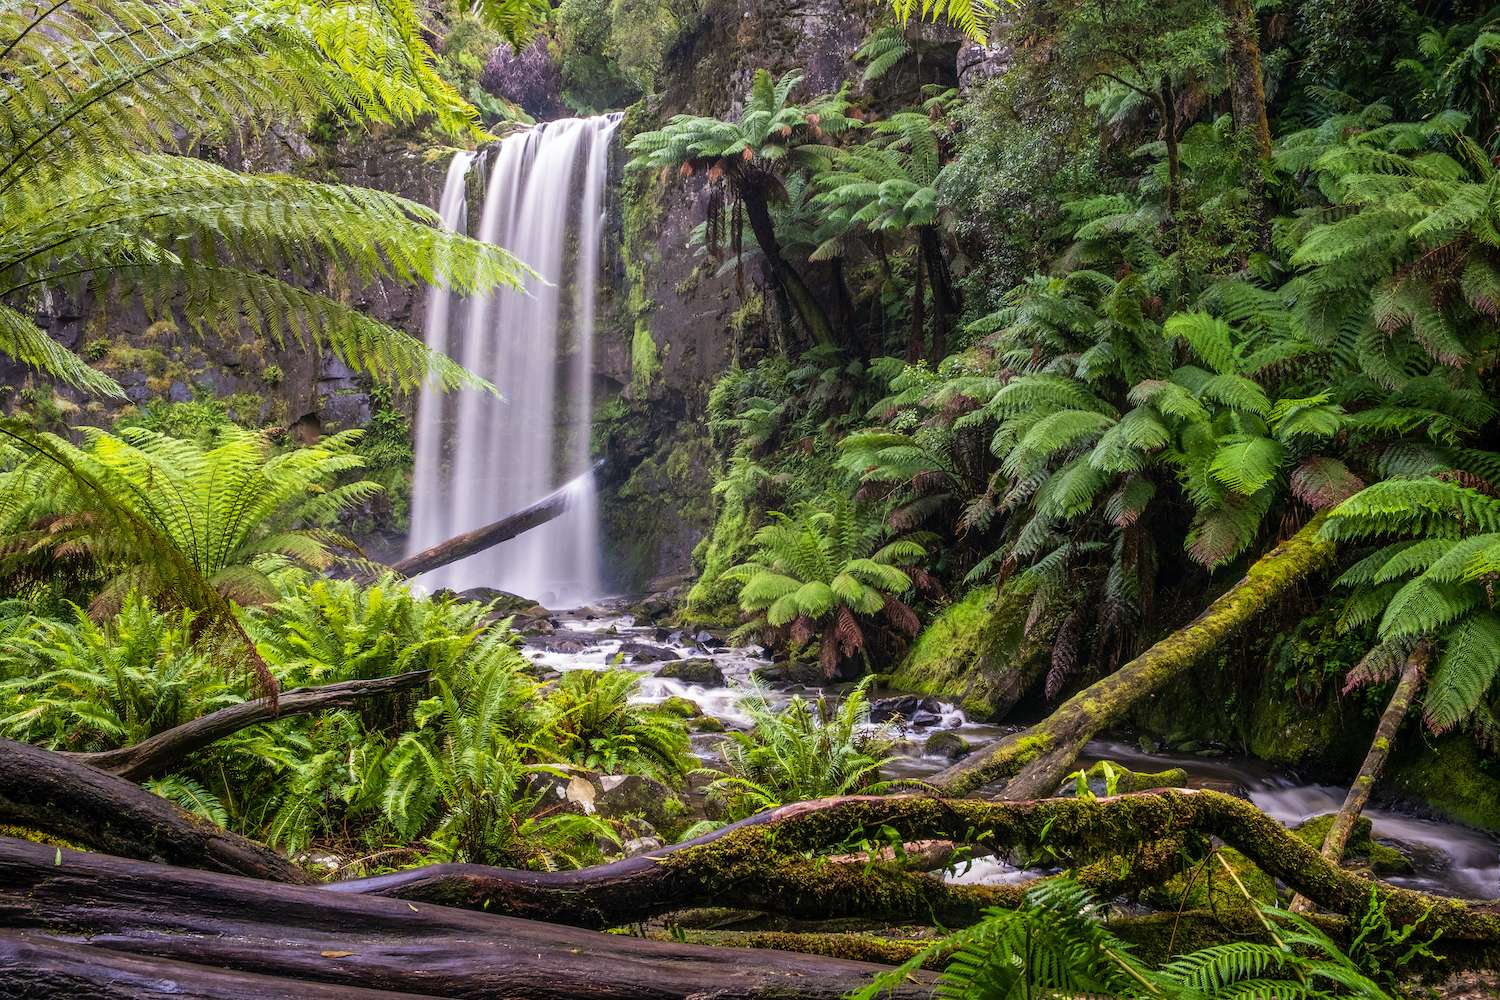 Hopetoun falls in a lush green rainforest of the Great Otway National Park in Victoria, Australia